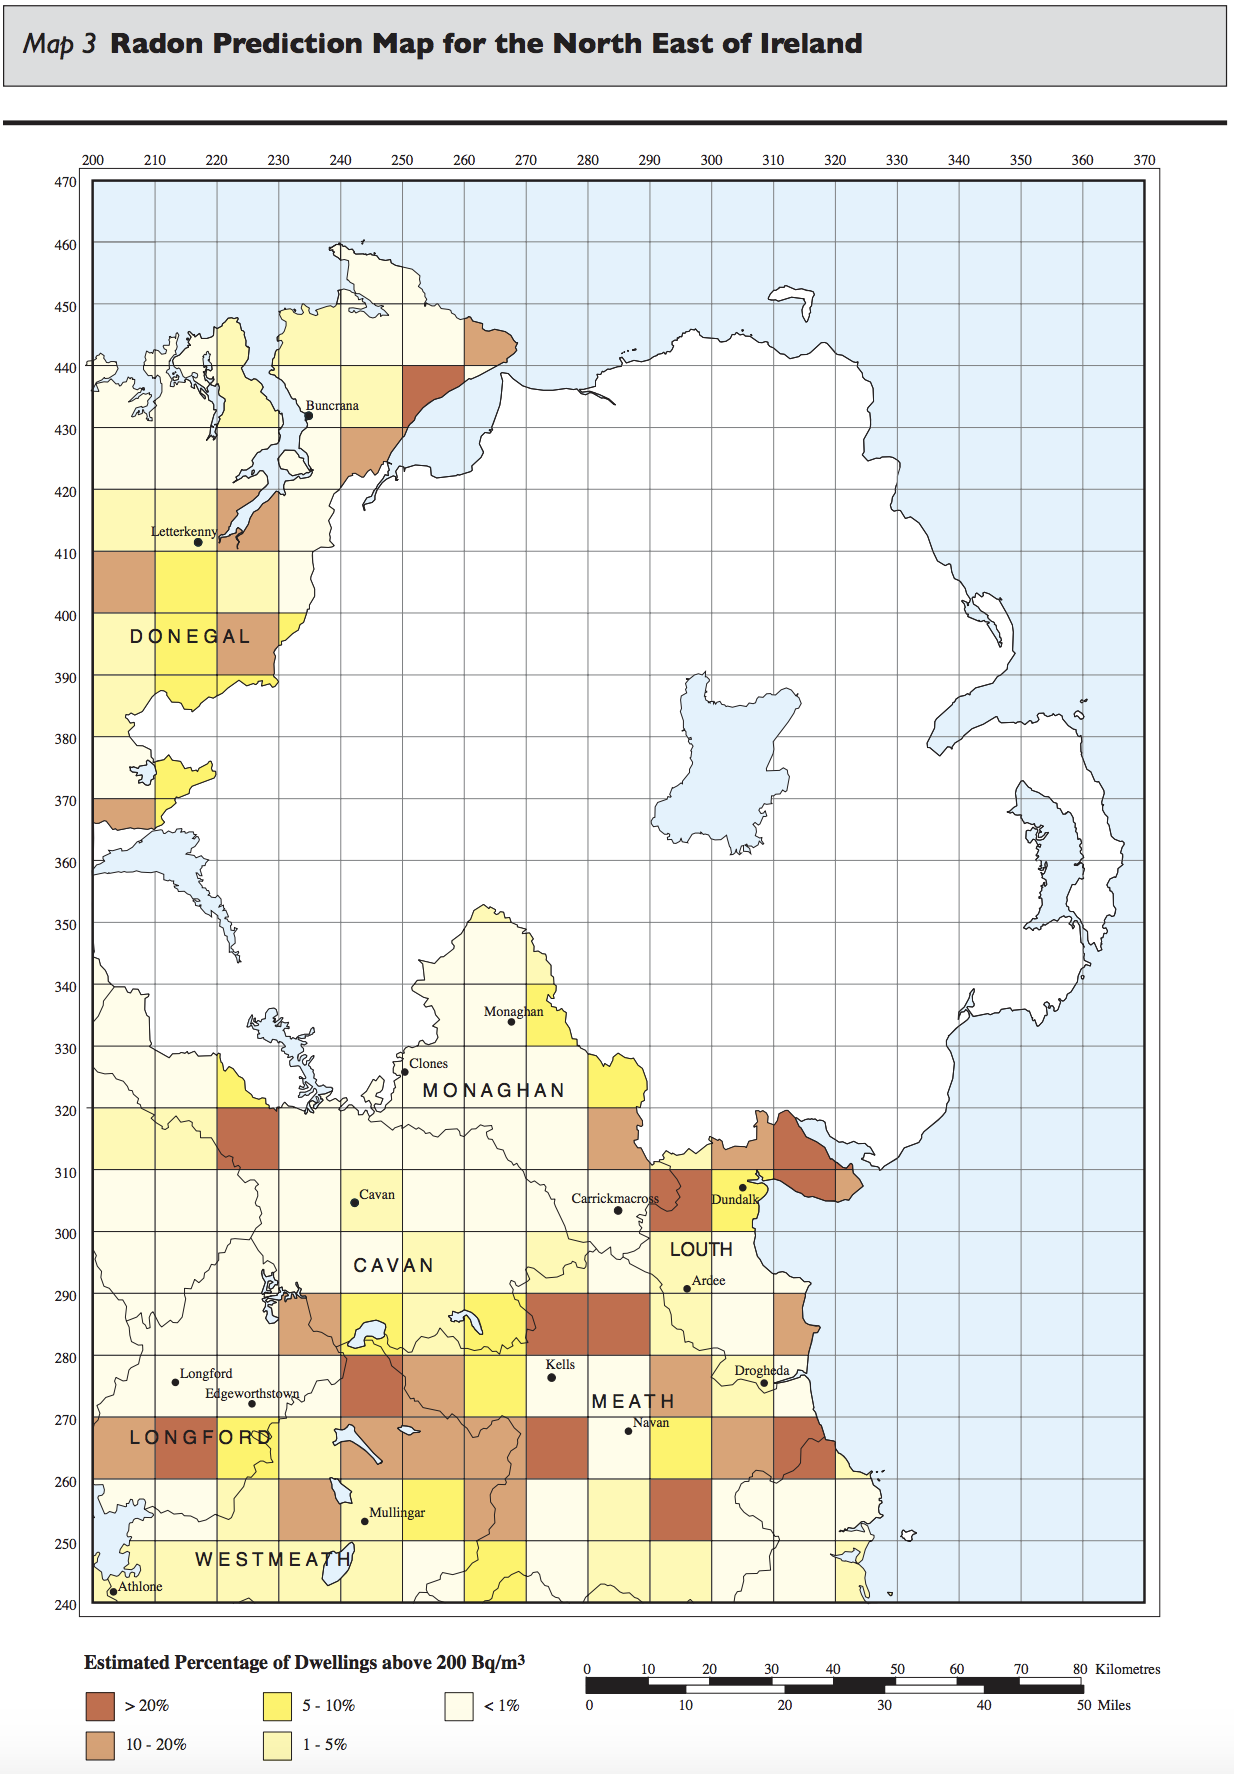 Diagram HC5 - Radon prediction map for the North East of Ireland - Extract from TGD C